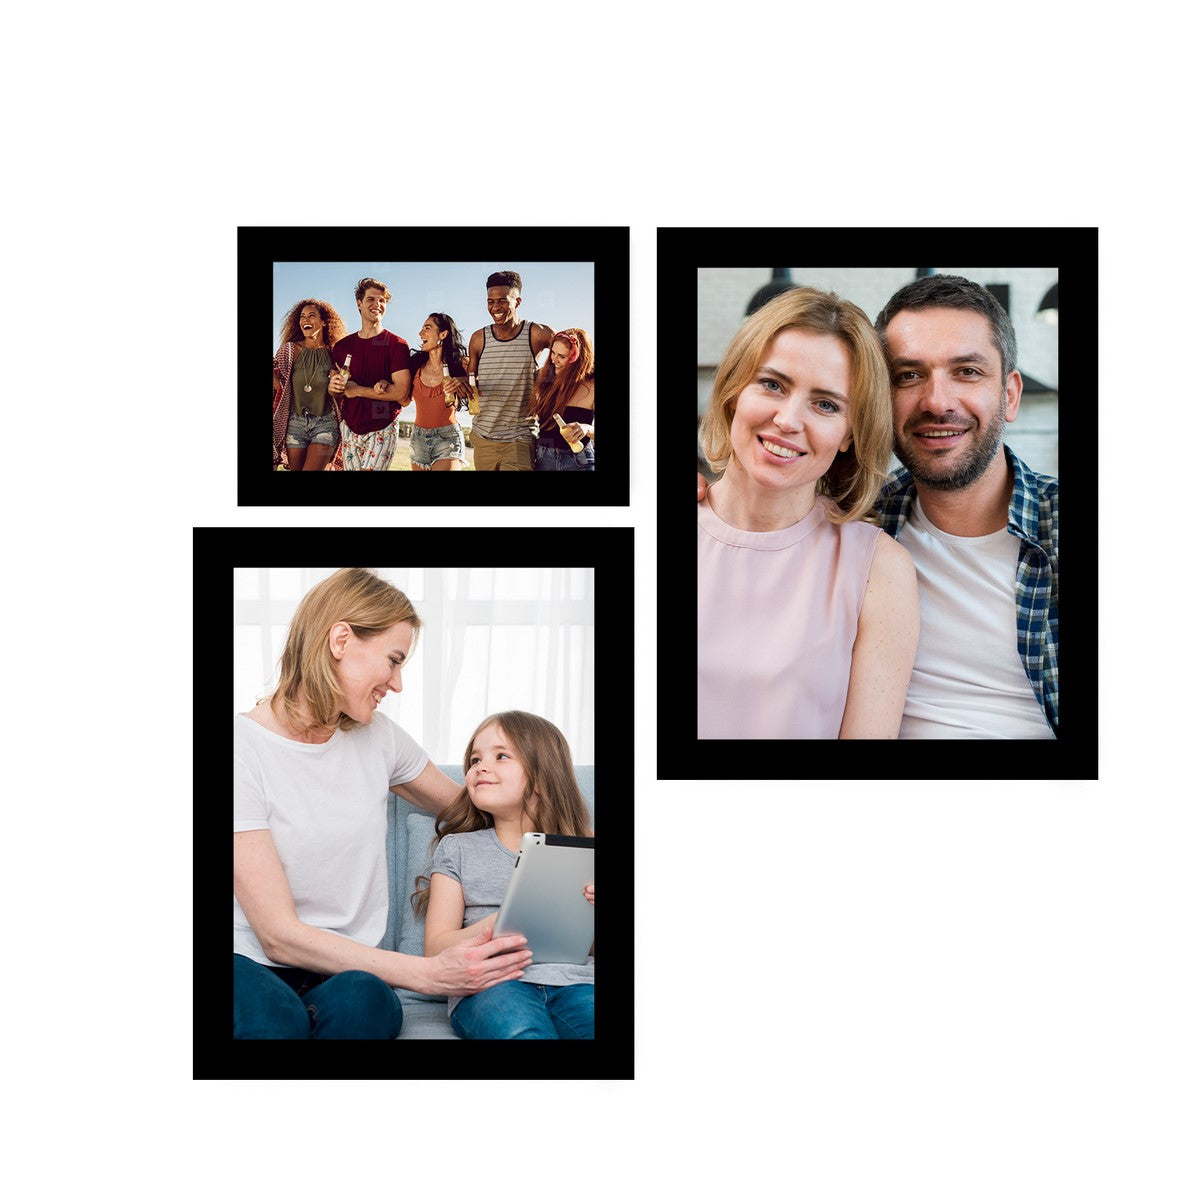 Memory Wall Collage Photo Frame - Set of 3 Photo Frames for 1 Photo of 5"x7" and 2 Photos of 8"x10"